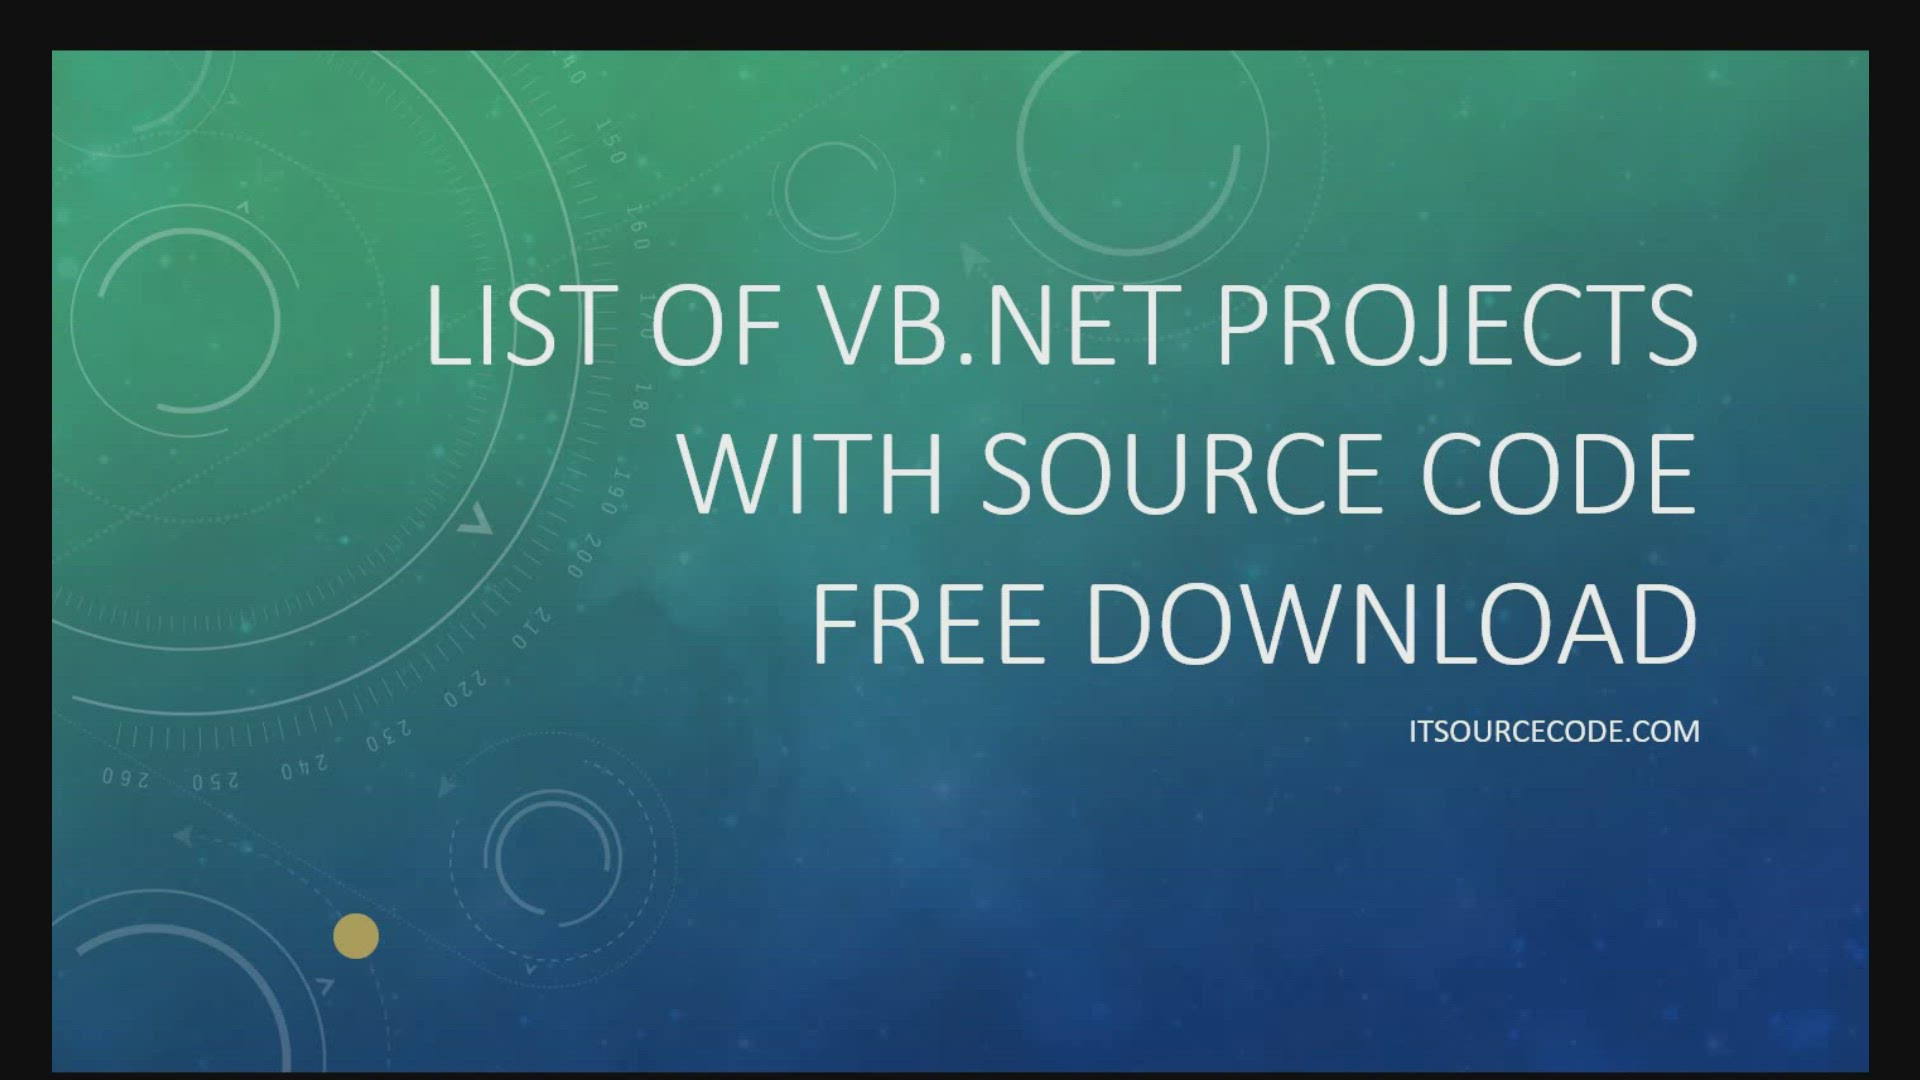 List of Projects with Source Code Free Download 2020 Visual